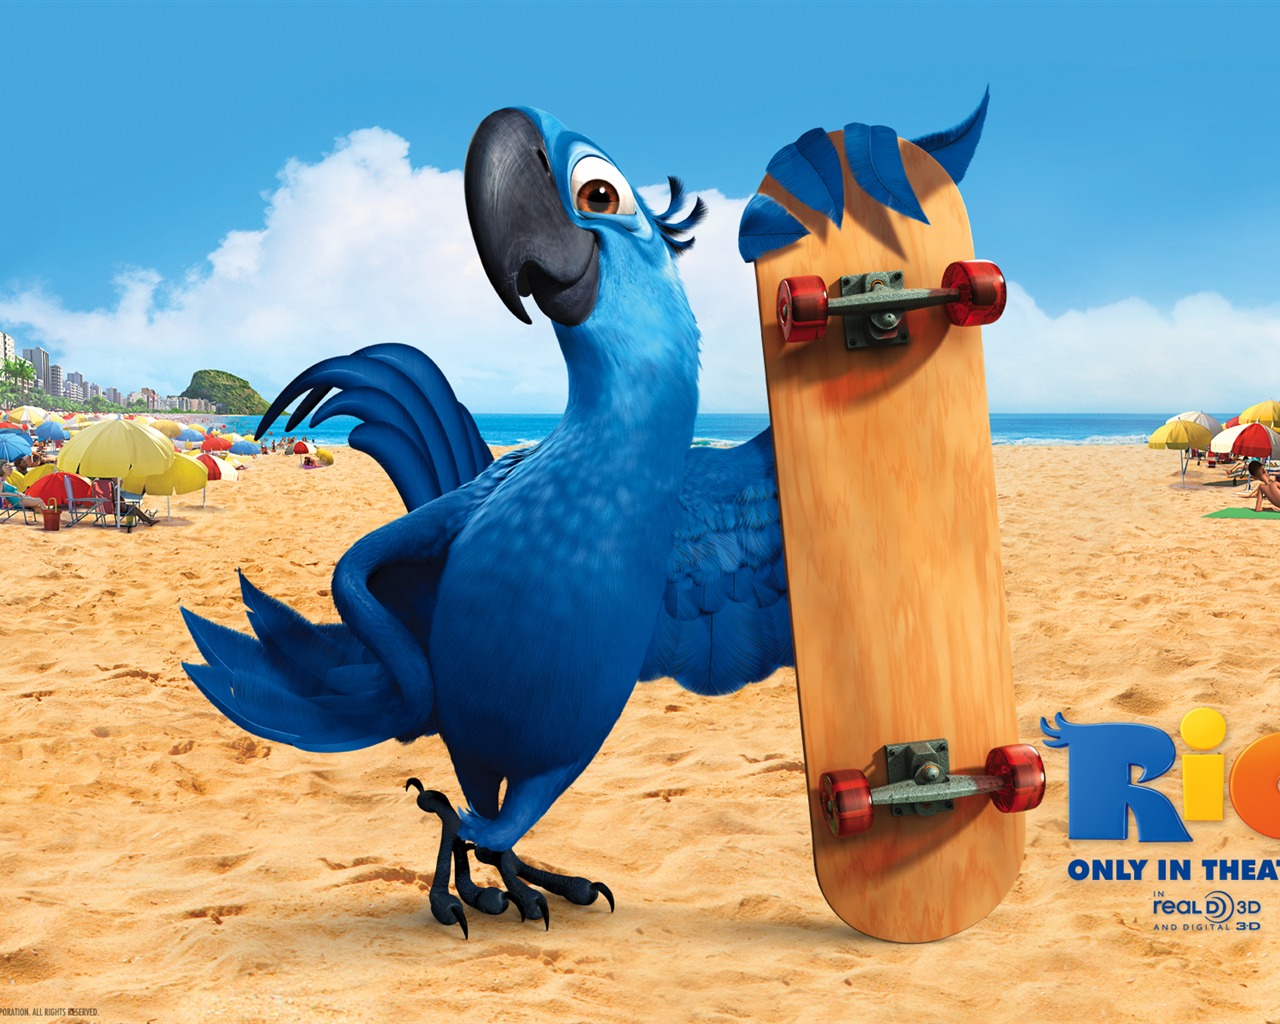 Rio 2011 wallpapers #3 - 1280x1024